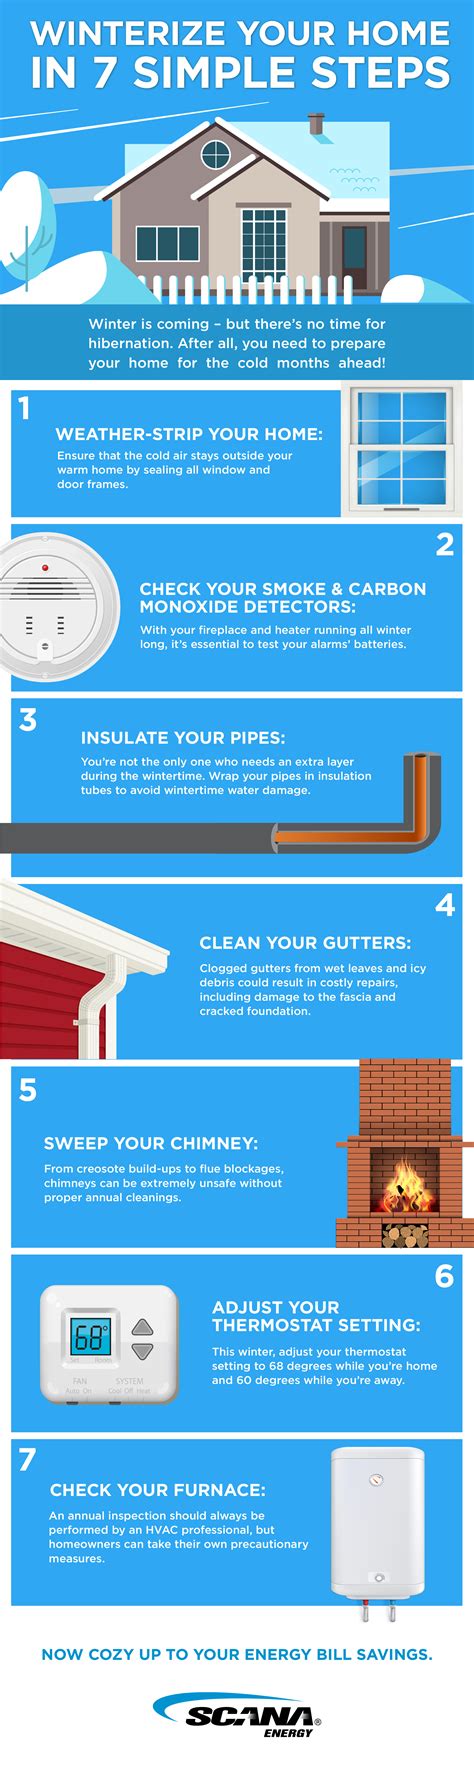 Preparing Your Home For Winter In 7 Simple Steps